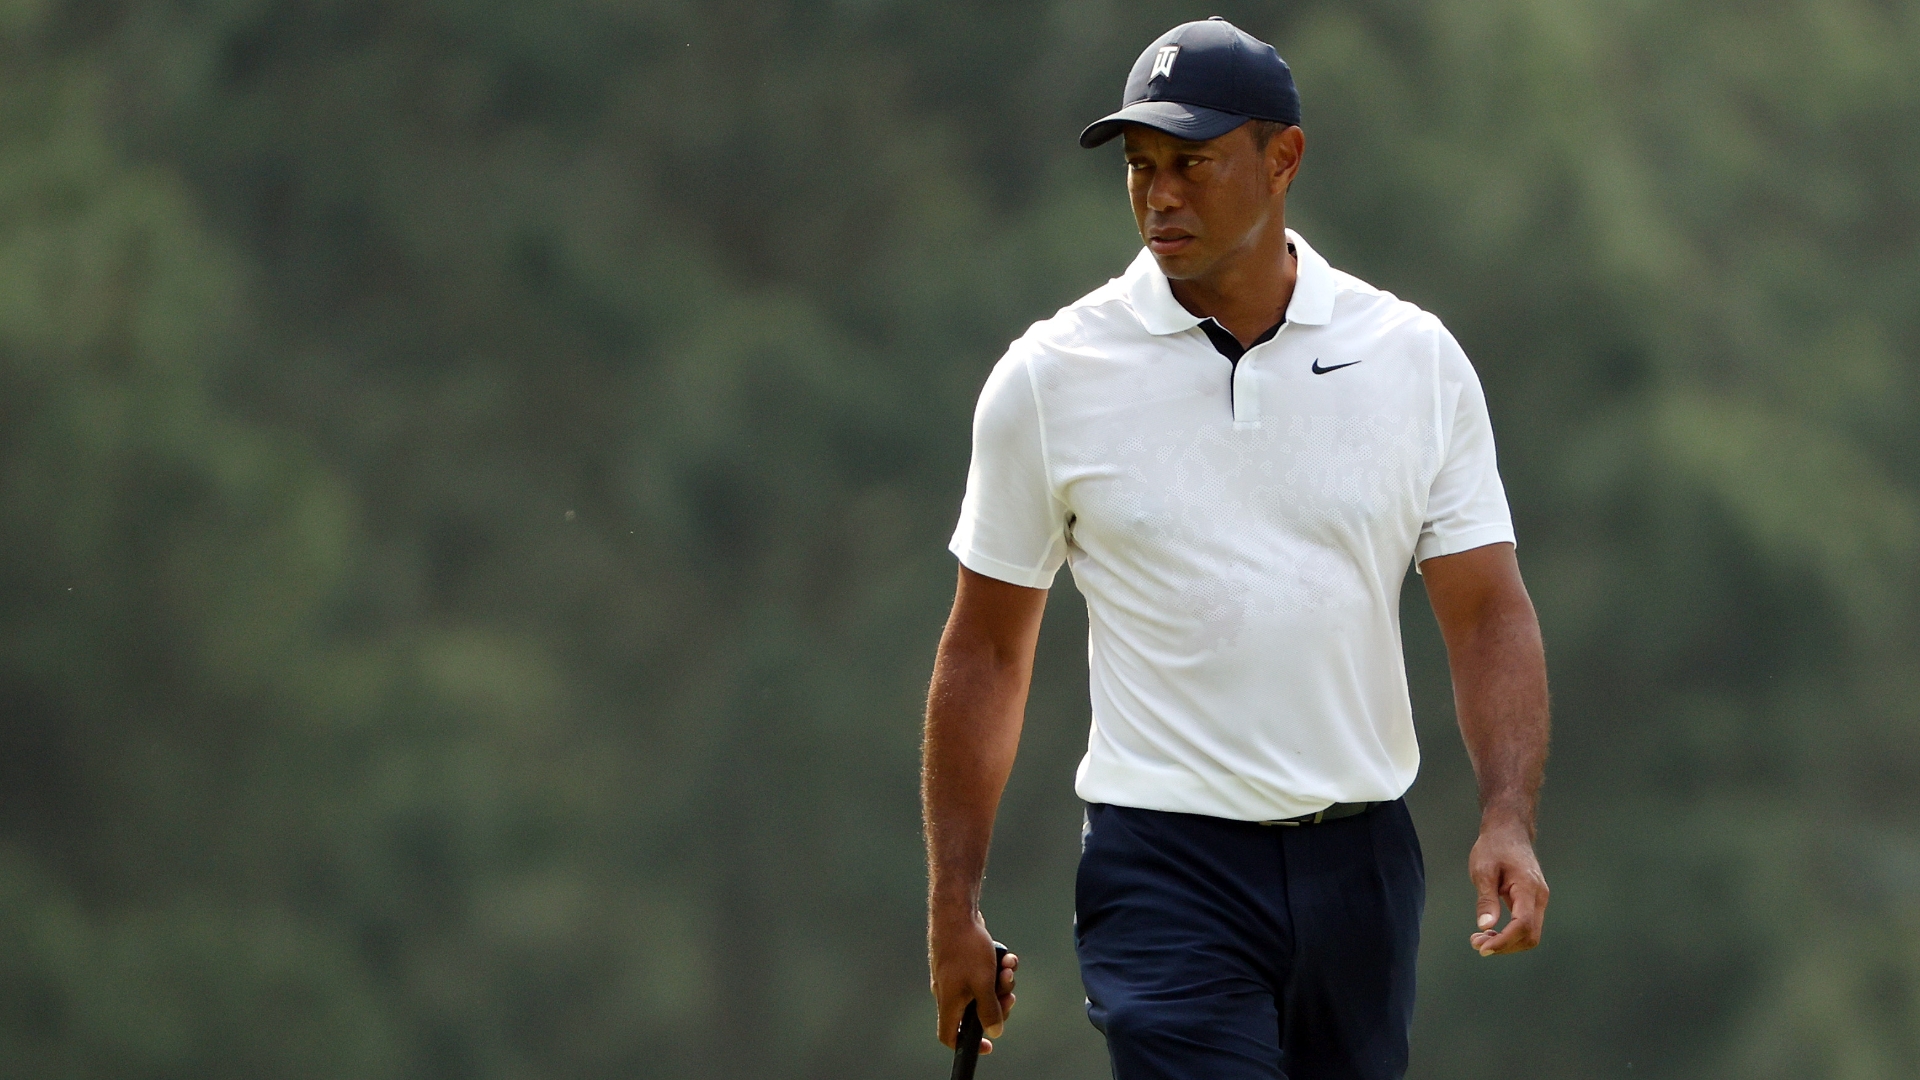 Tiger three-putts on seven to fall to 3 over on the day